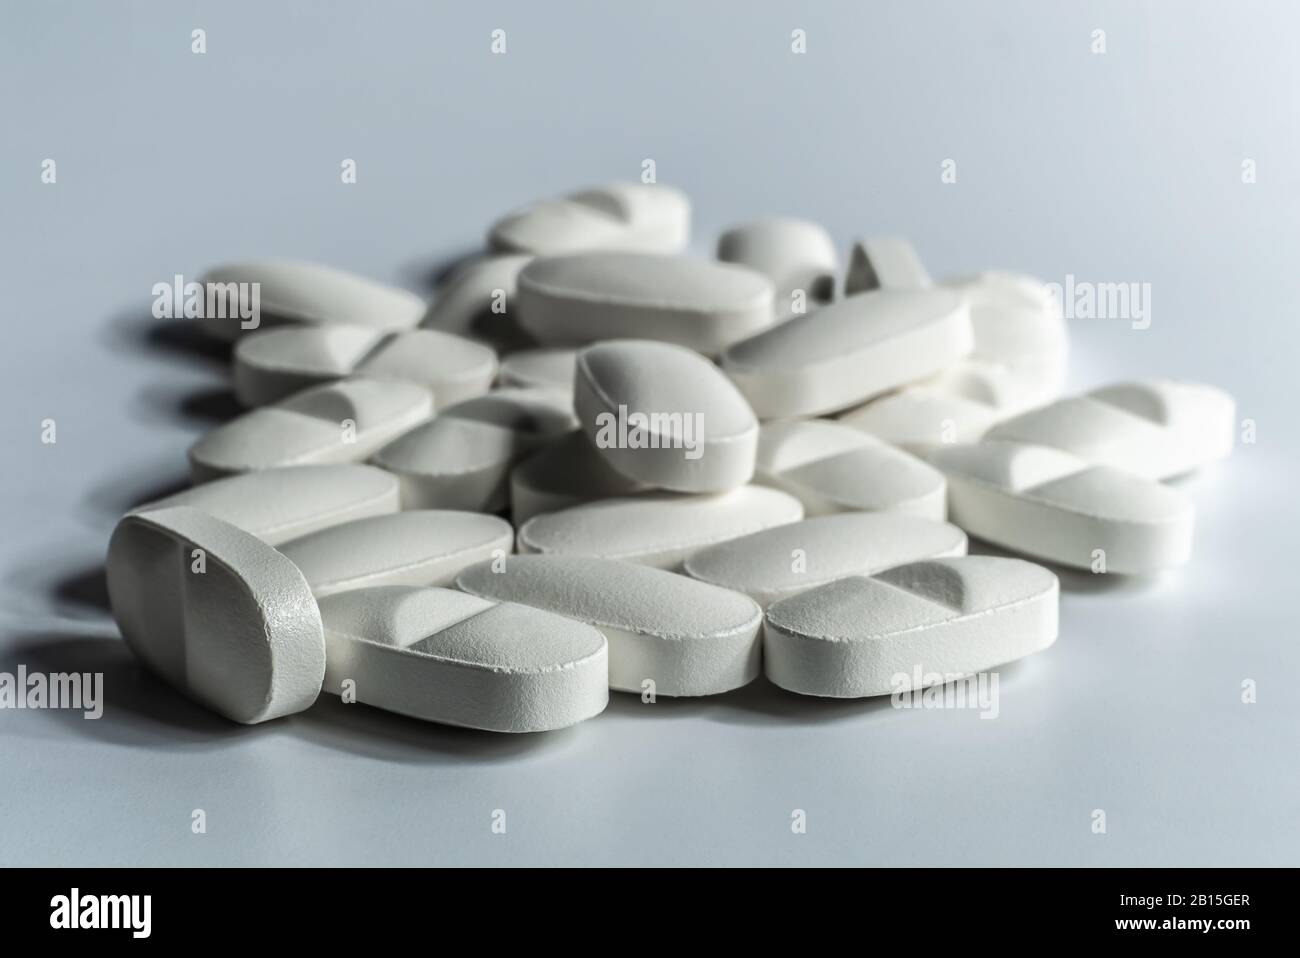 Closeup of many prescription drugs, medicine tablets or vitamin pills in a pile on white background - Concept of healthcare, opioids addiction Stock Photo